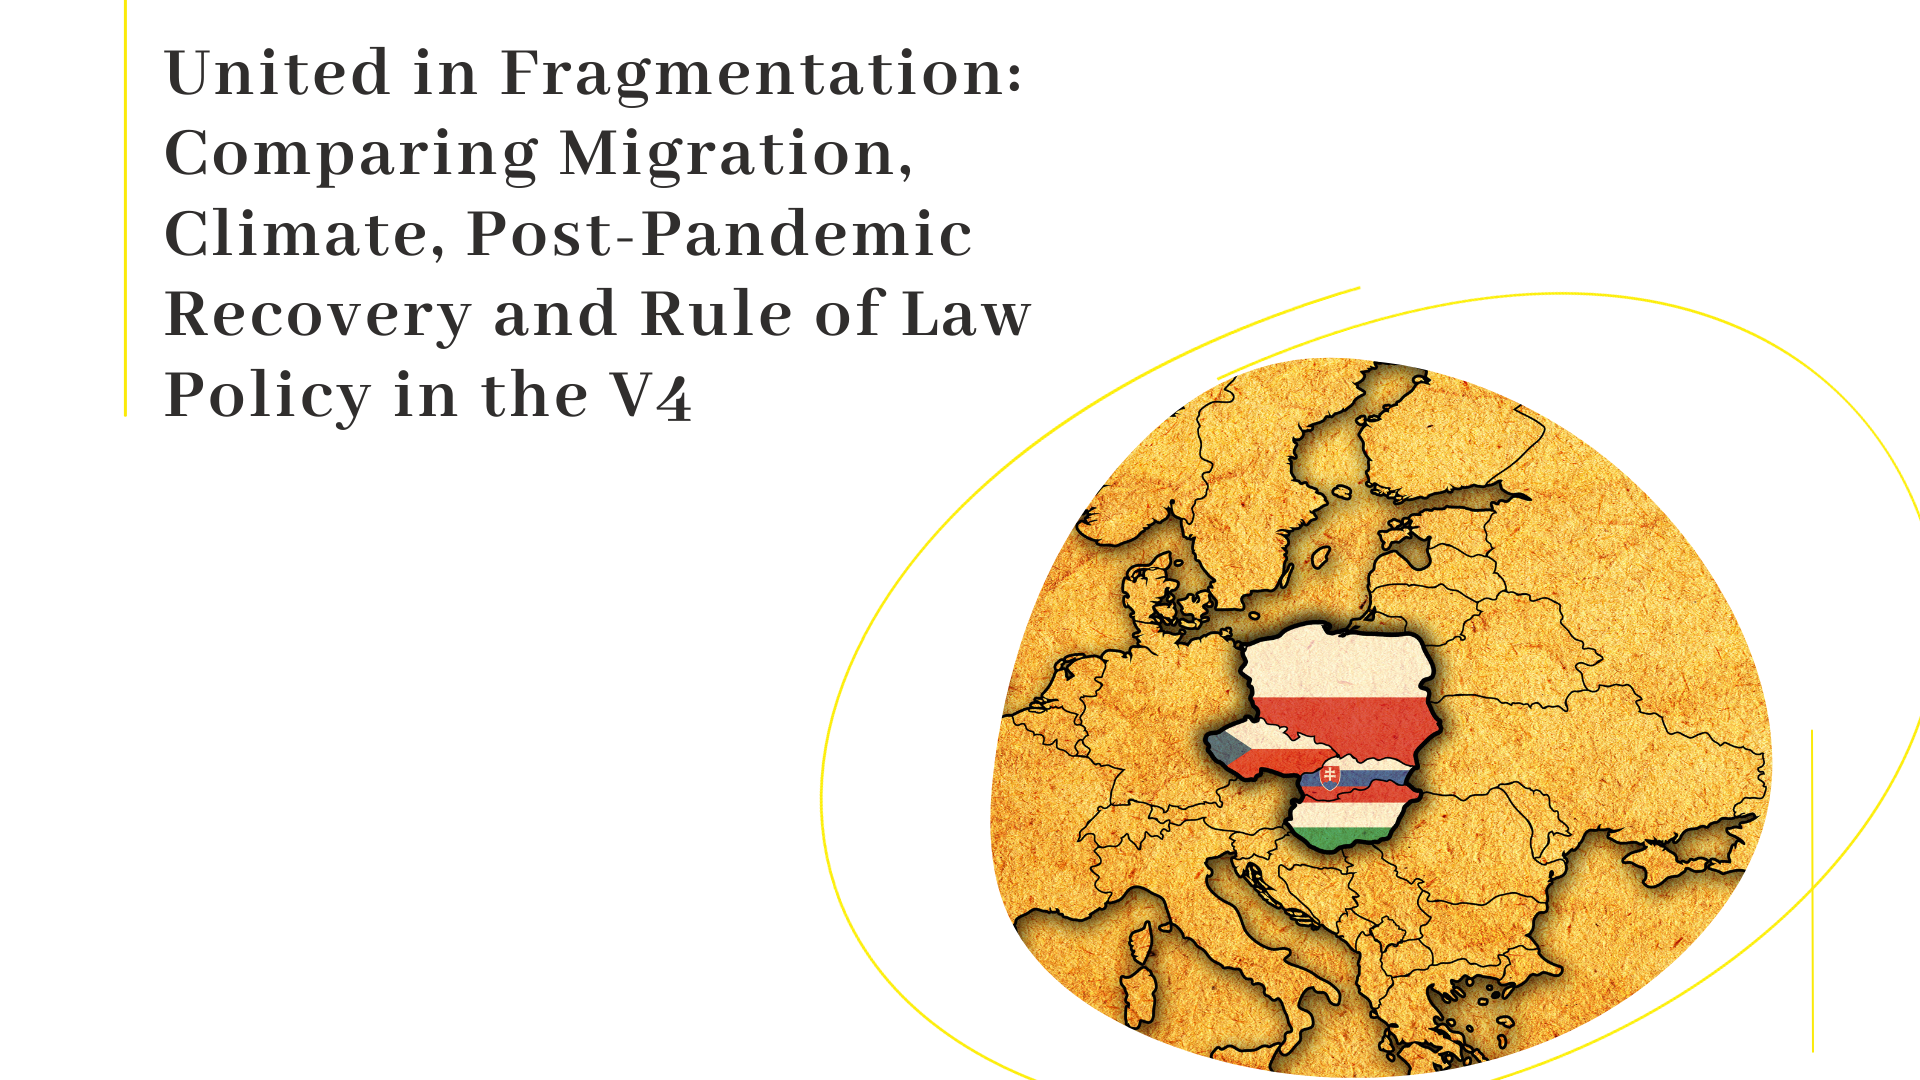 United in Fragmentation: Comparing Migration, Climate, Post-Pandemic Recovery and Rule of Law Policy in the V4 – Comparative Analysis